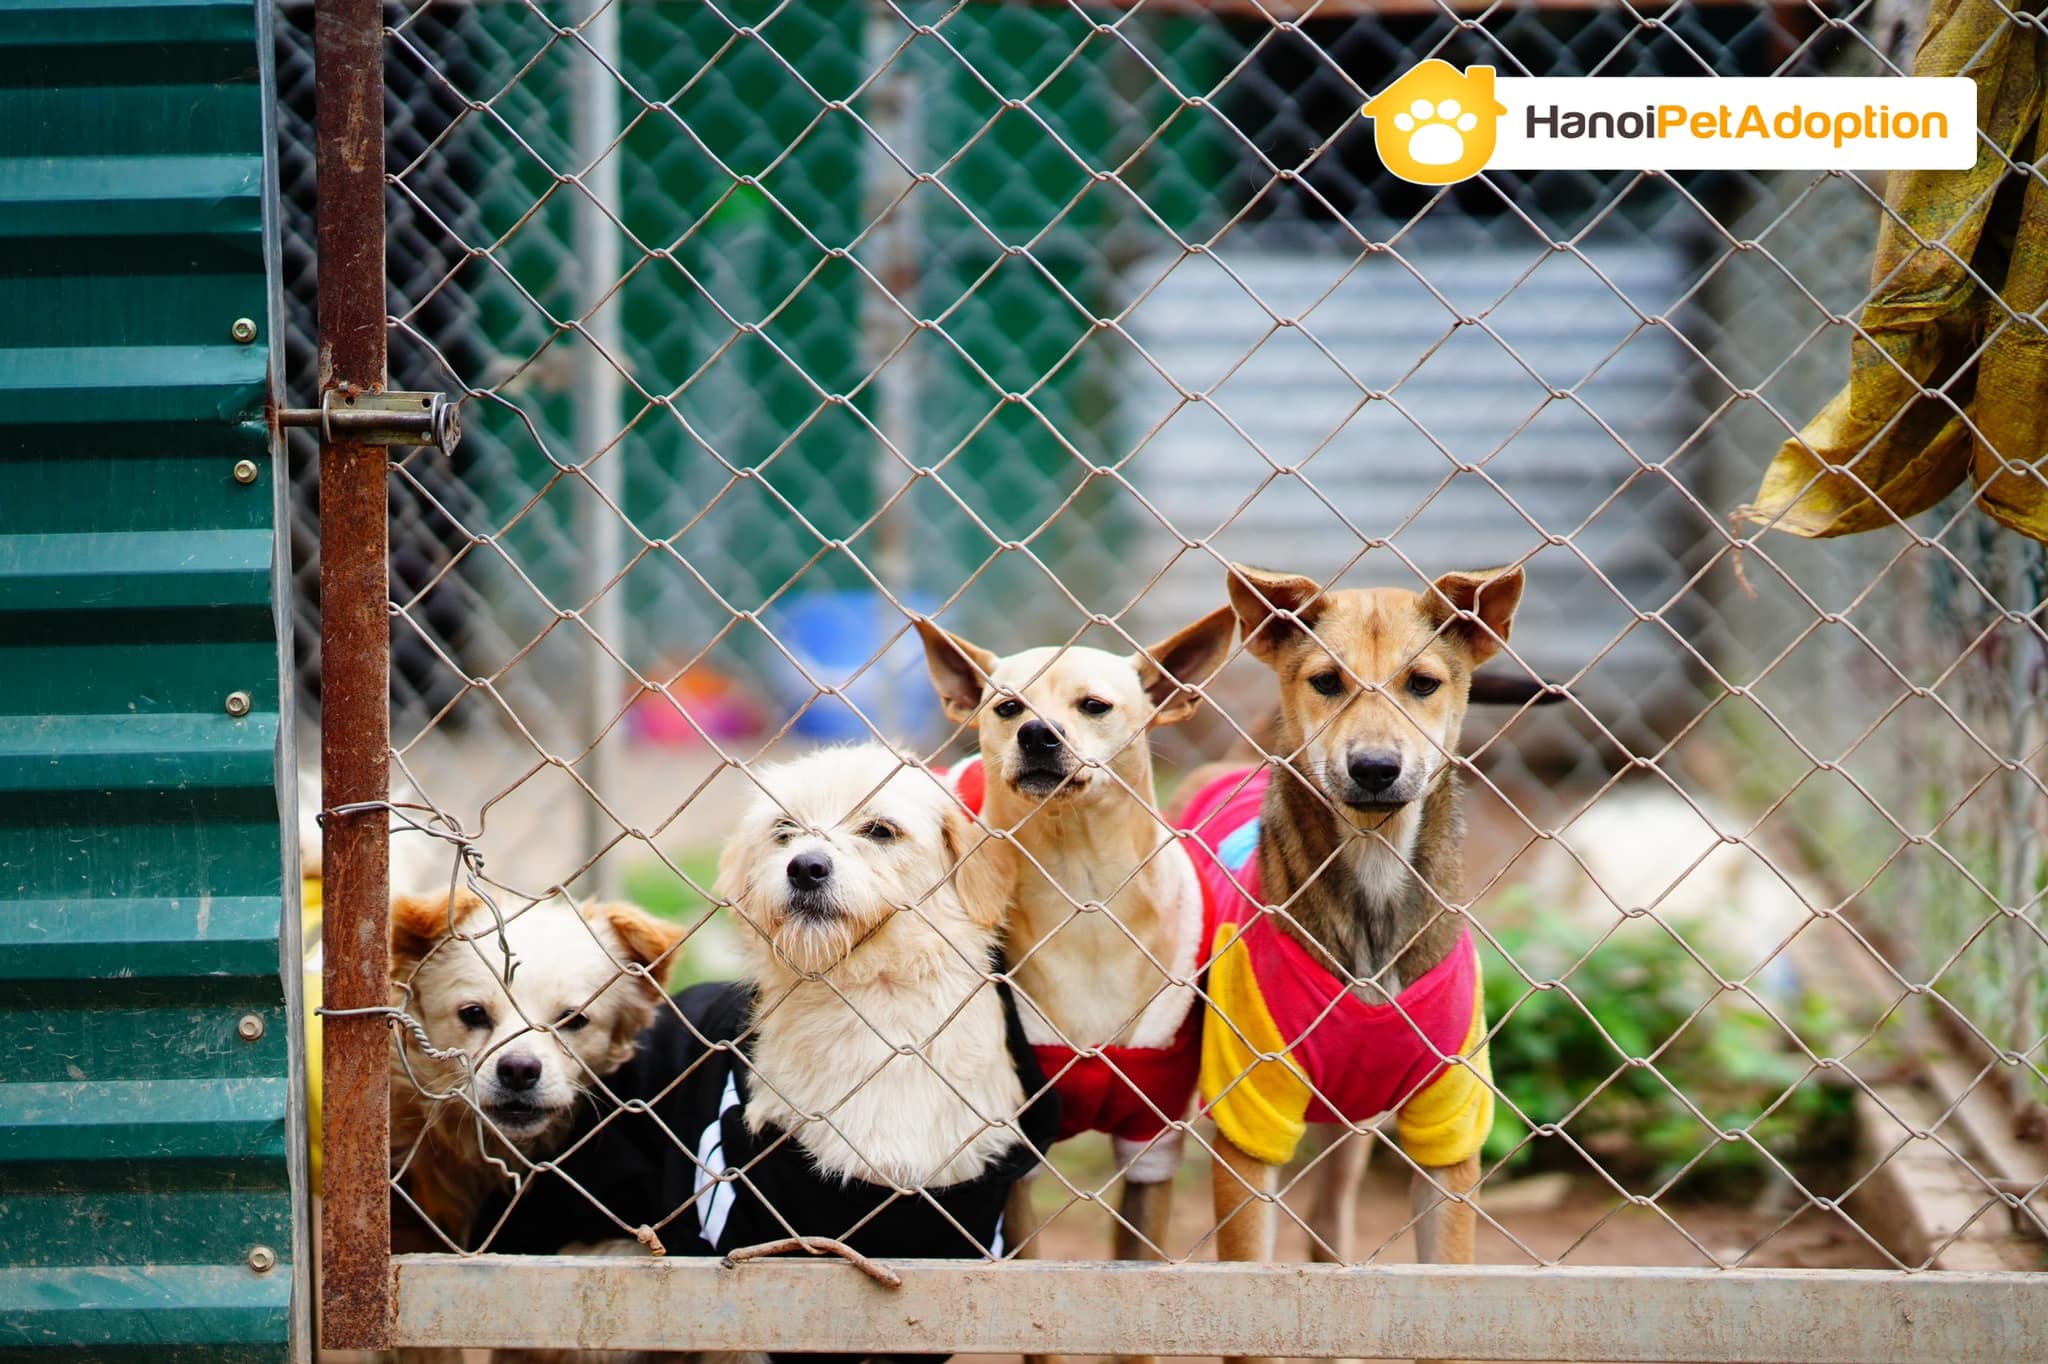 Dogs need to be adopted - HPA